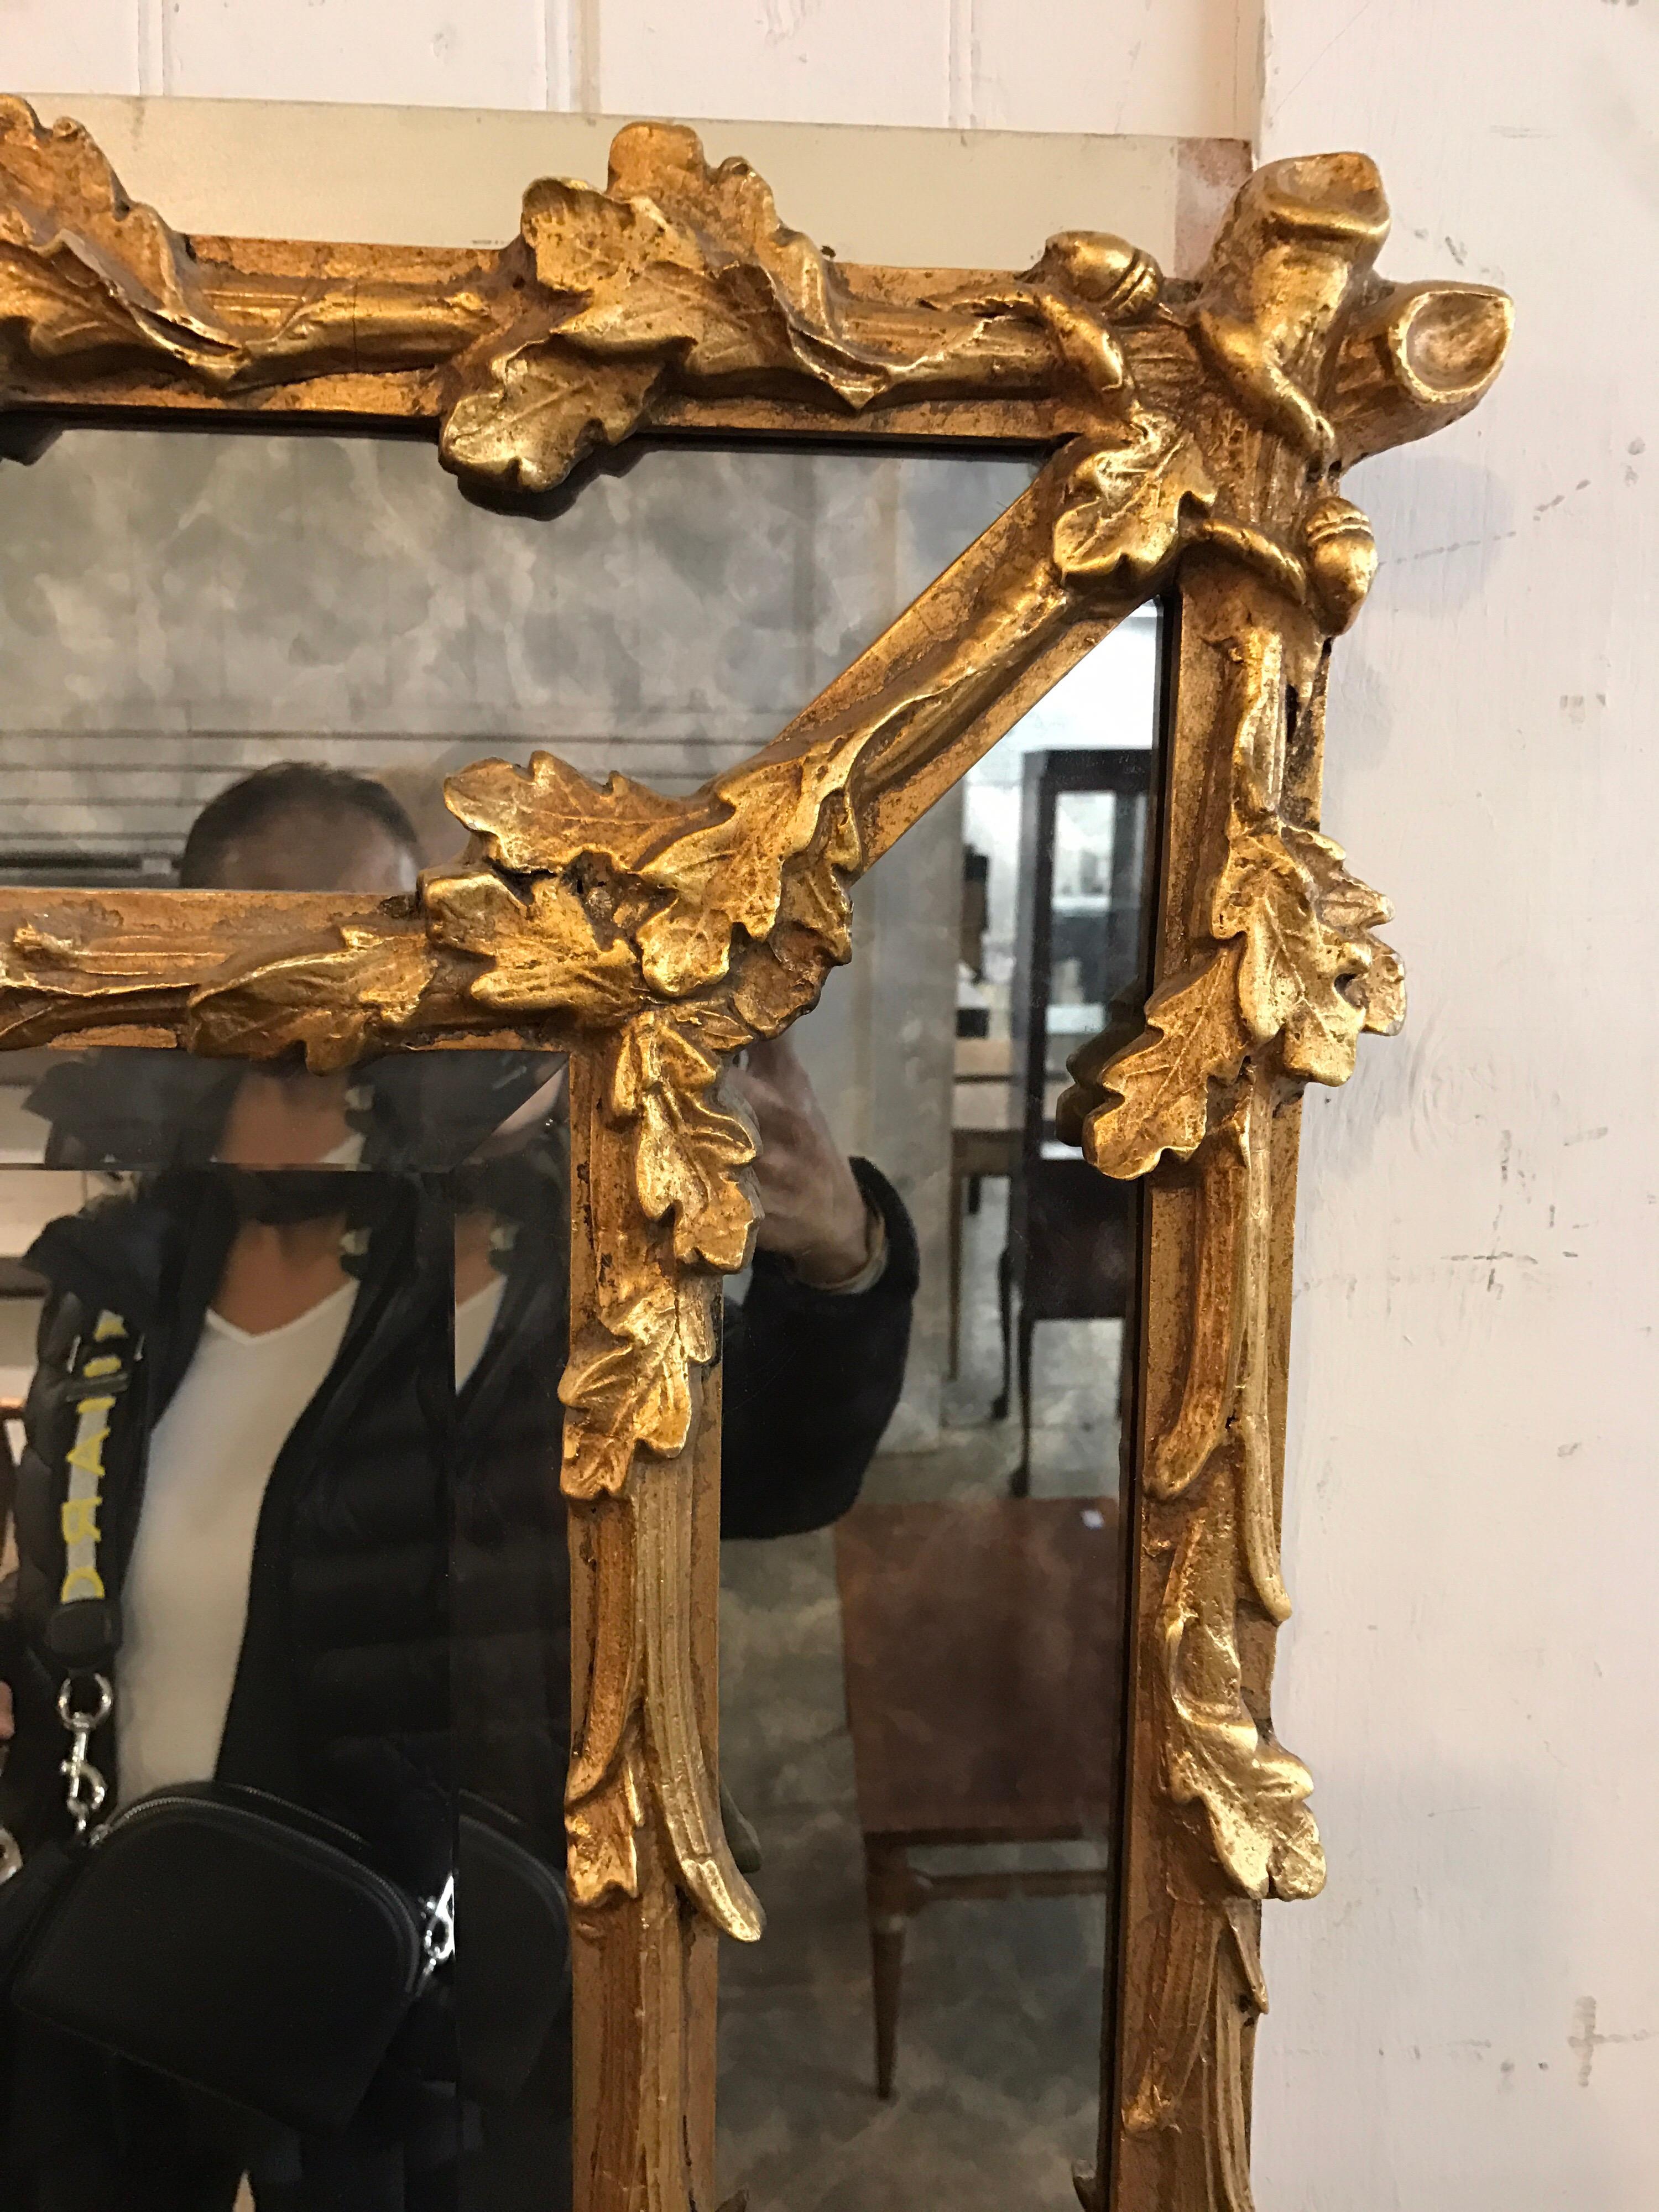 A very fine Italian 19th century Baroque Revival style Florentine giltwood carved mirror frame, with carved branches with oak leaves and acorns scrolled on borders and centred with a beveled mirror plate. All gilt is original and there is also a